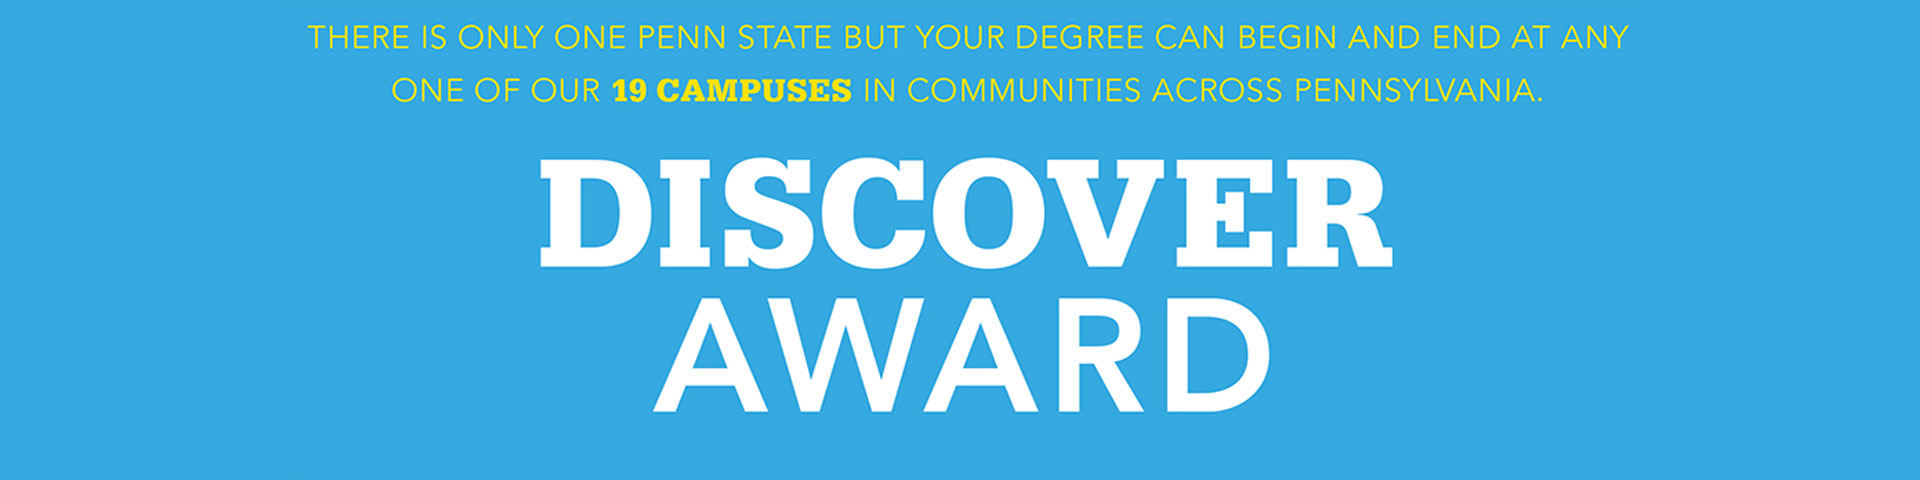 THERE IS ONLY ONE PENN STATE BUT YOUR DEGREE CAN BEGIN AND END AT ANY ONE OF OUR 19 CAMPUSES IN COMMUNITIES ACROSS PENNSYLVANIA. DISCOVER AWARD.